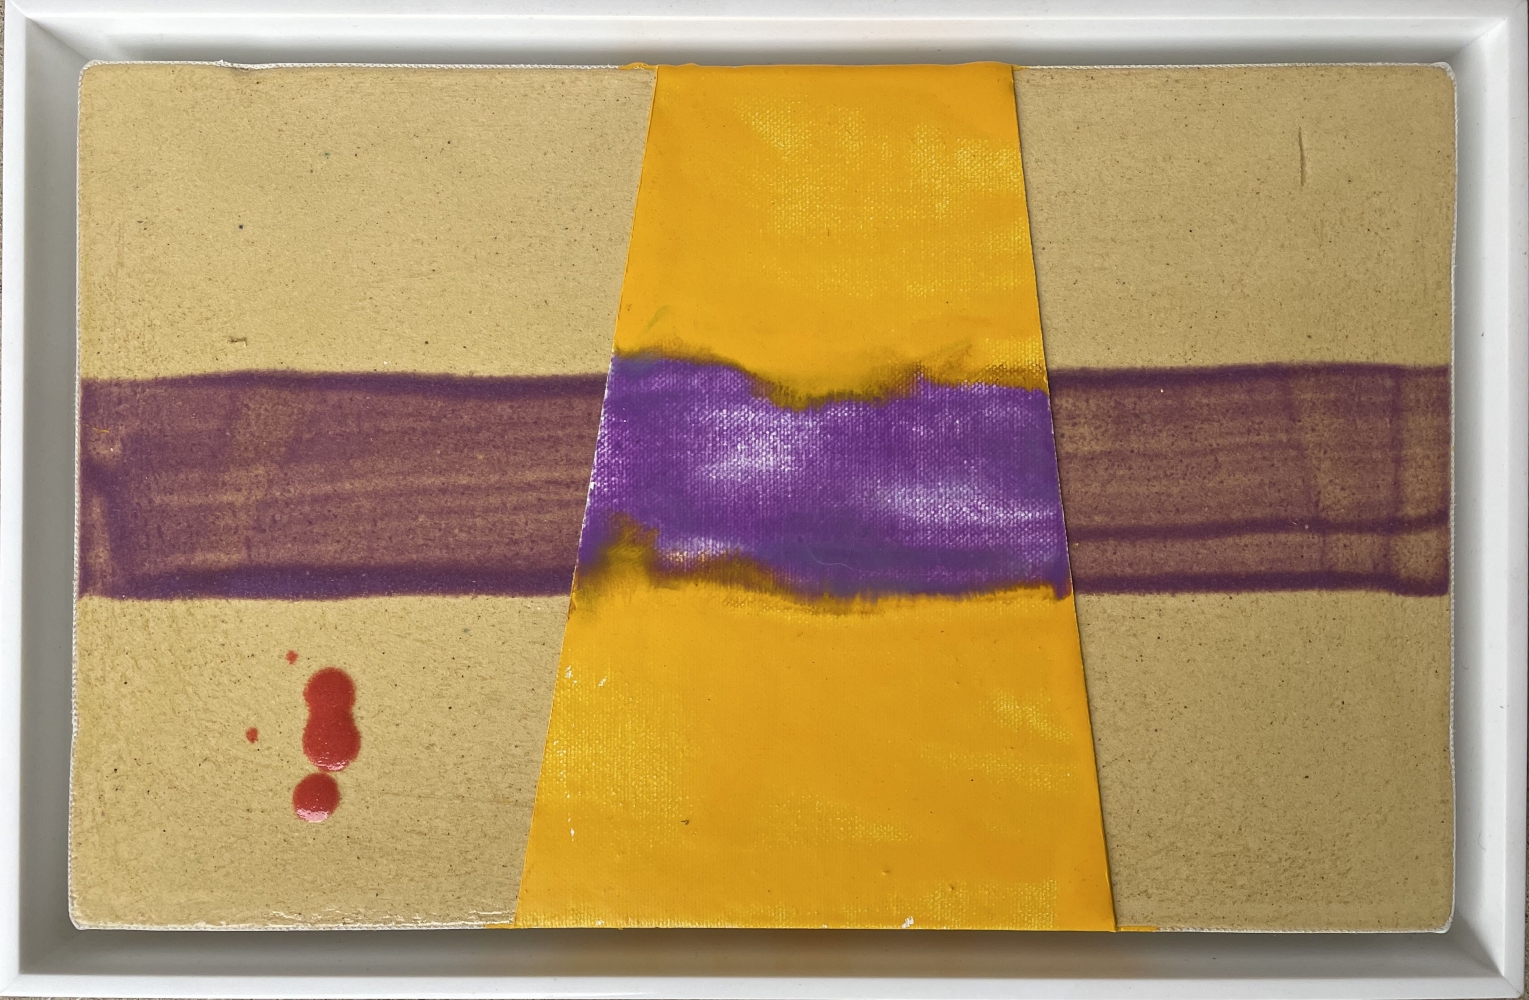 Frank.Olt.Untitled.Encaustic.on.Canvas.with.Ceramic.purple.and.yellow